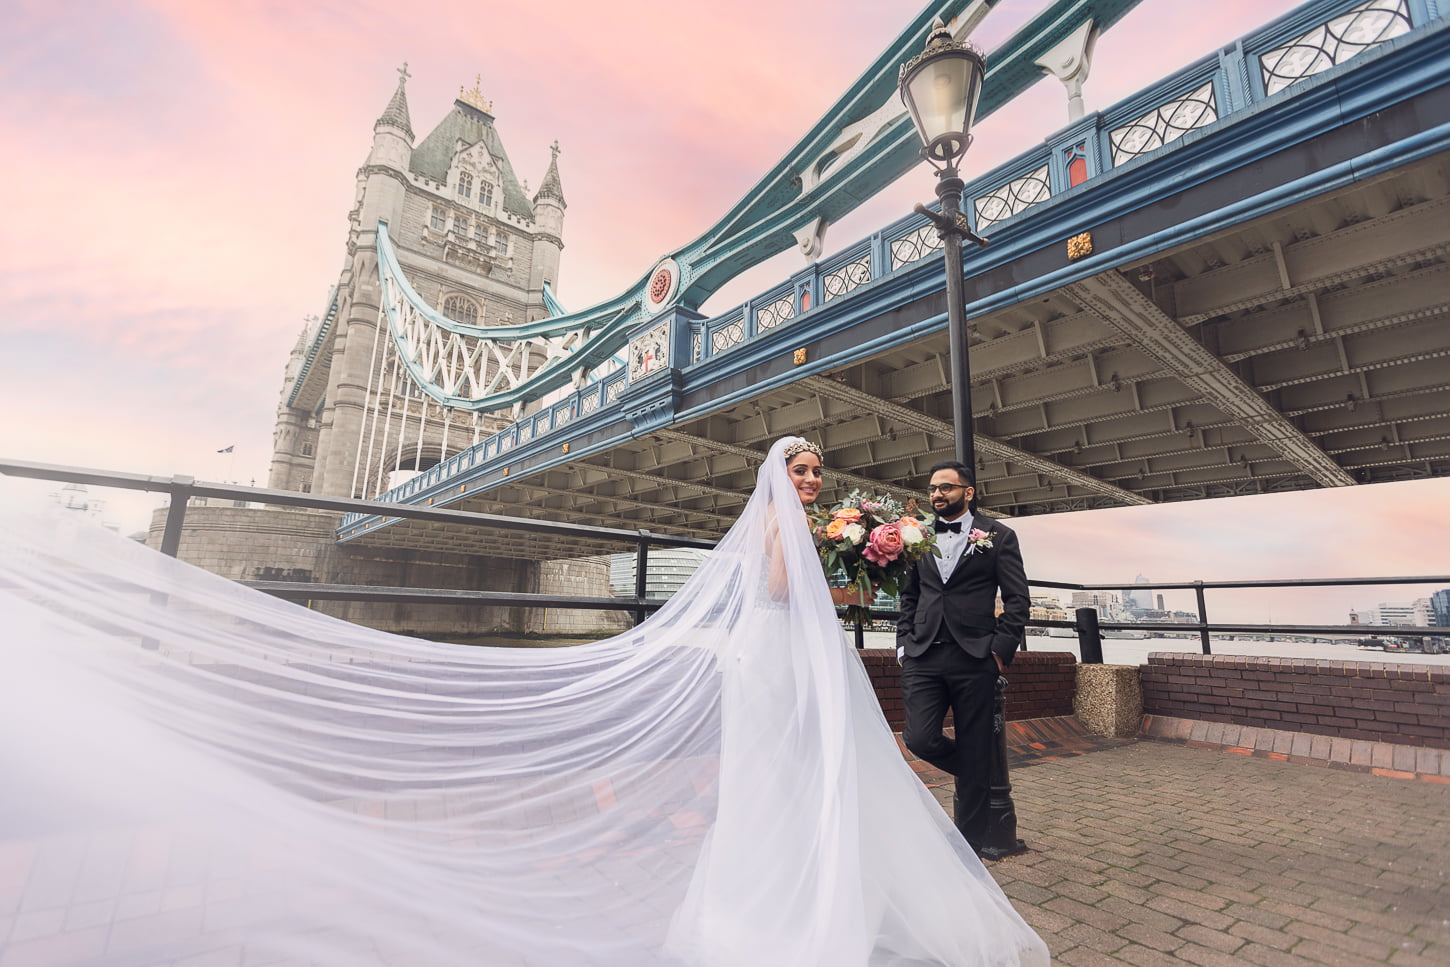 Indian Bride and Groom Wedding Day at Tower Bridge, central London, UK